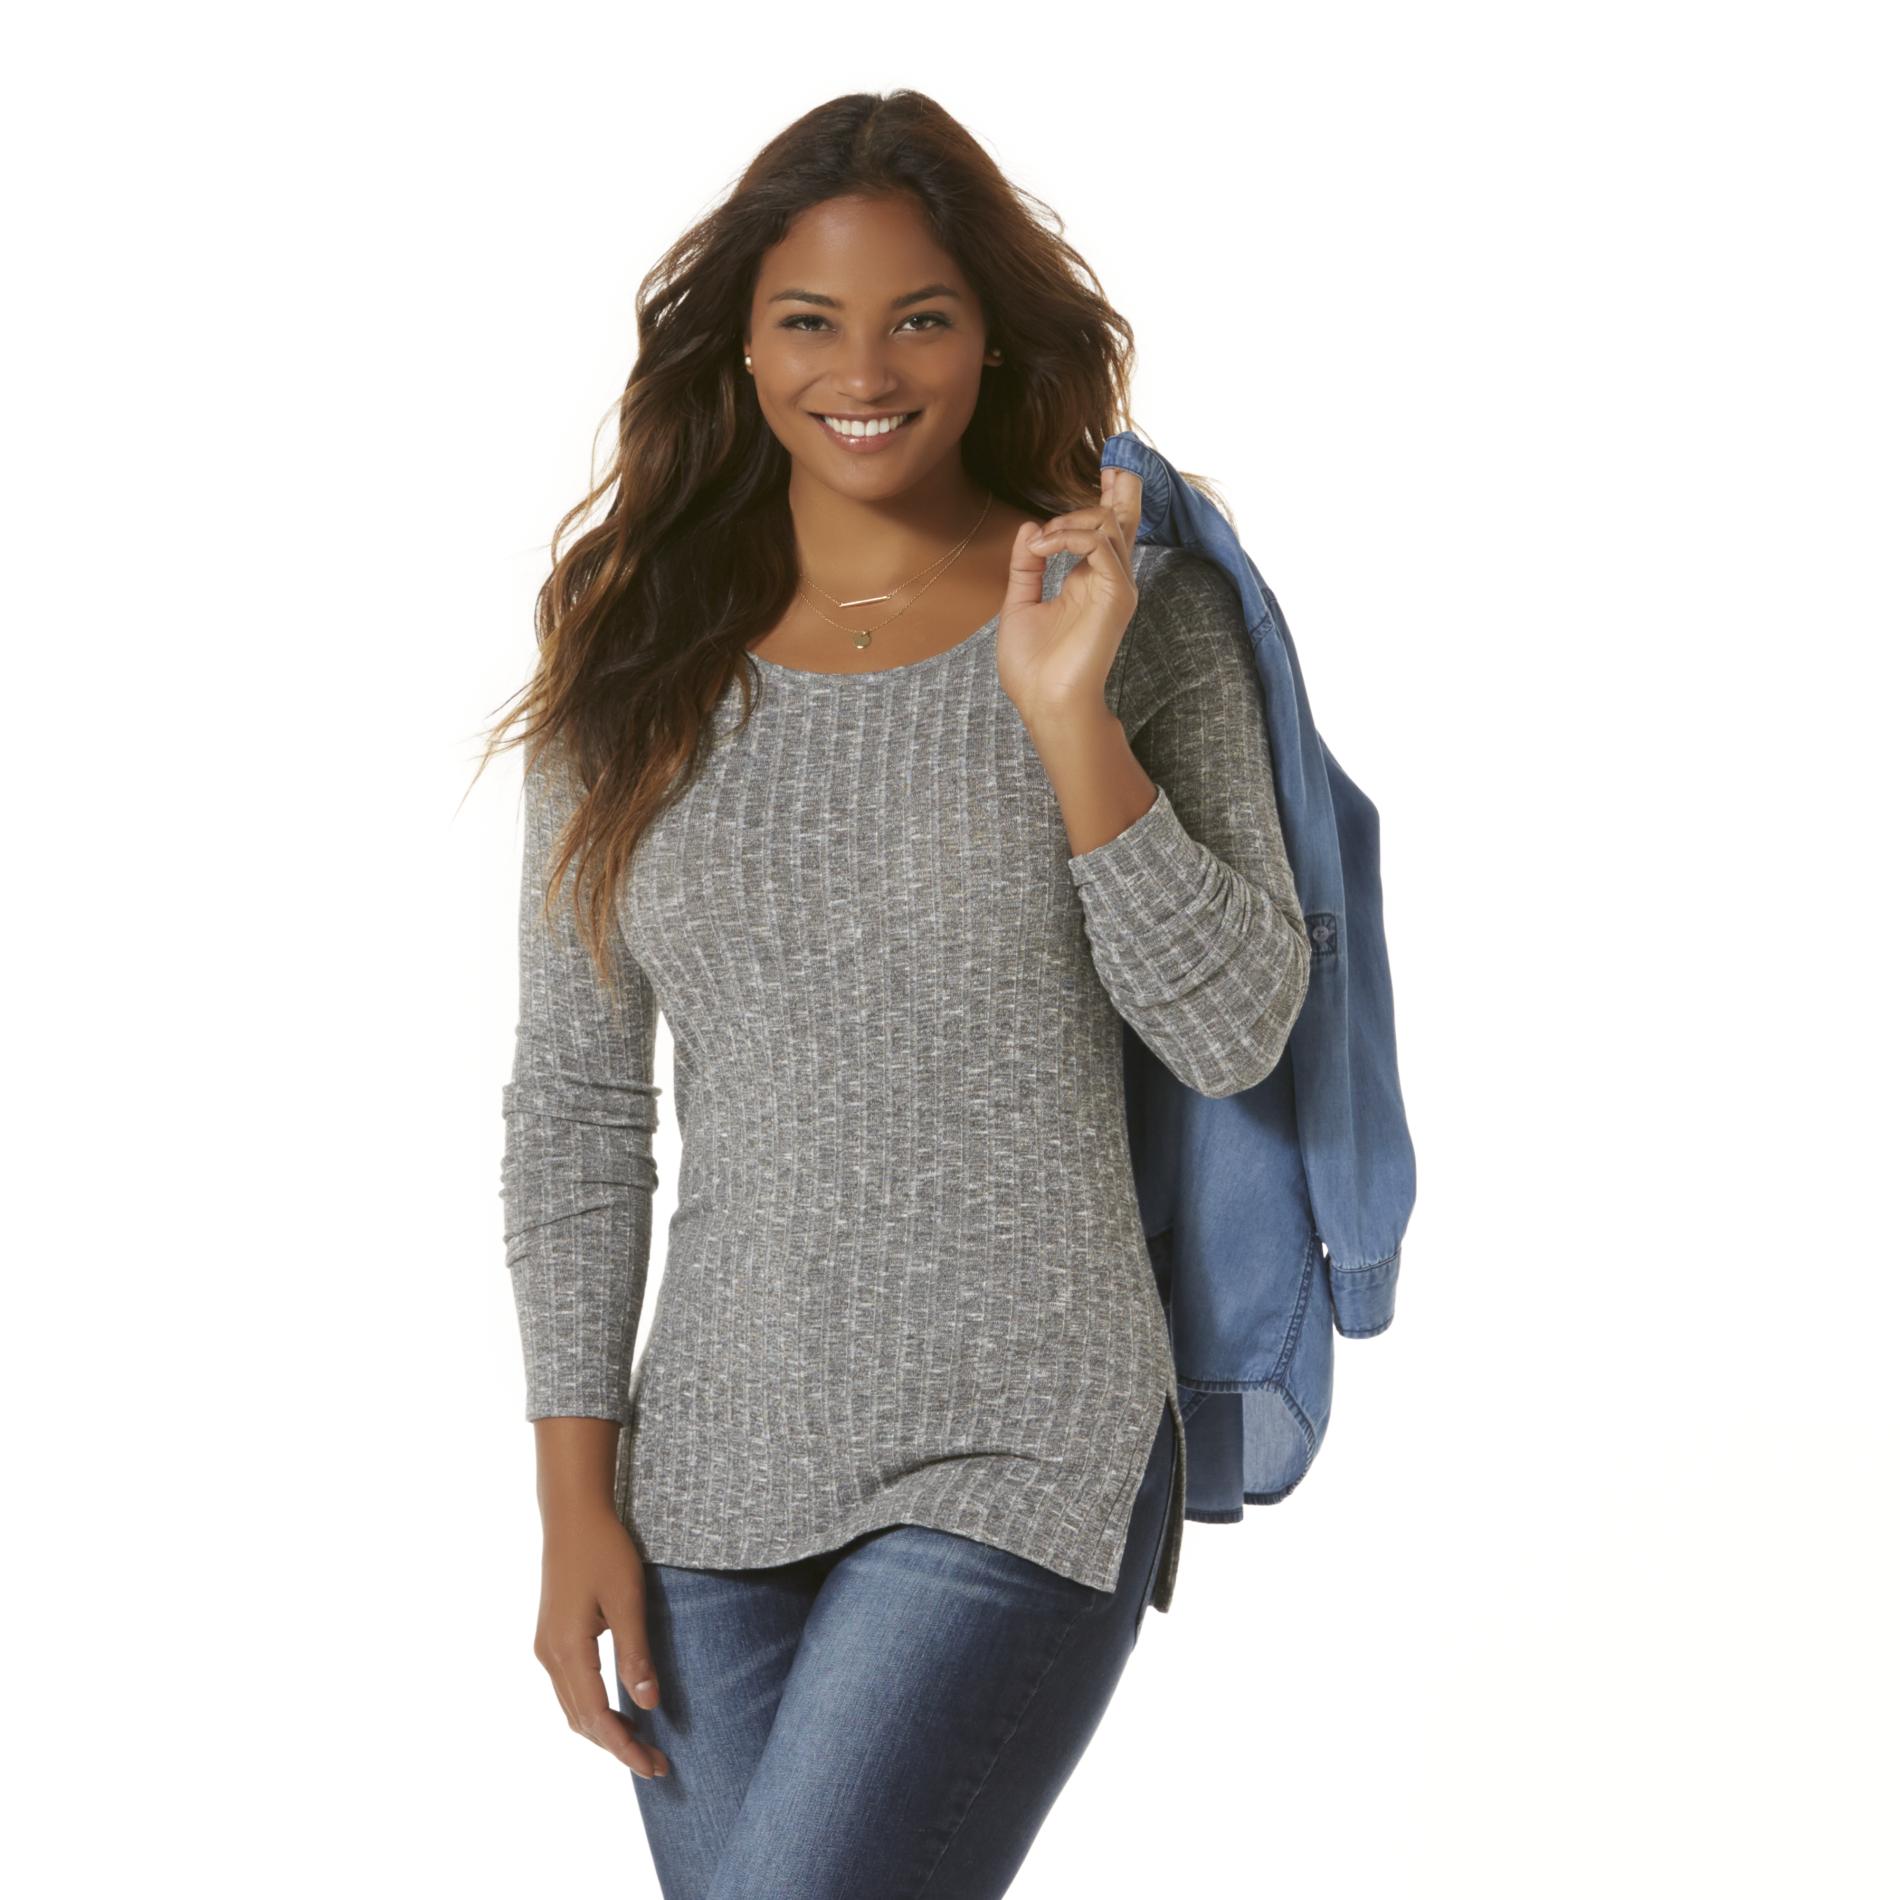 Simply Styled Women's Heathered Rib Knit Sweater